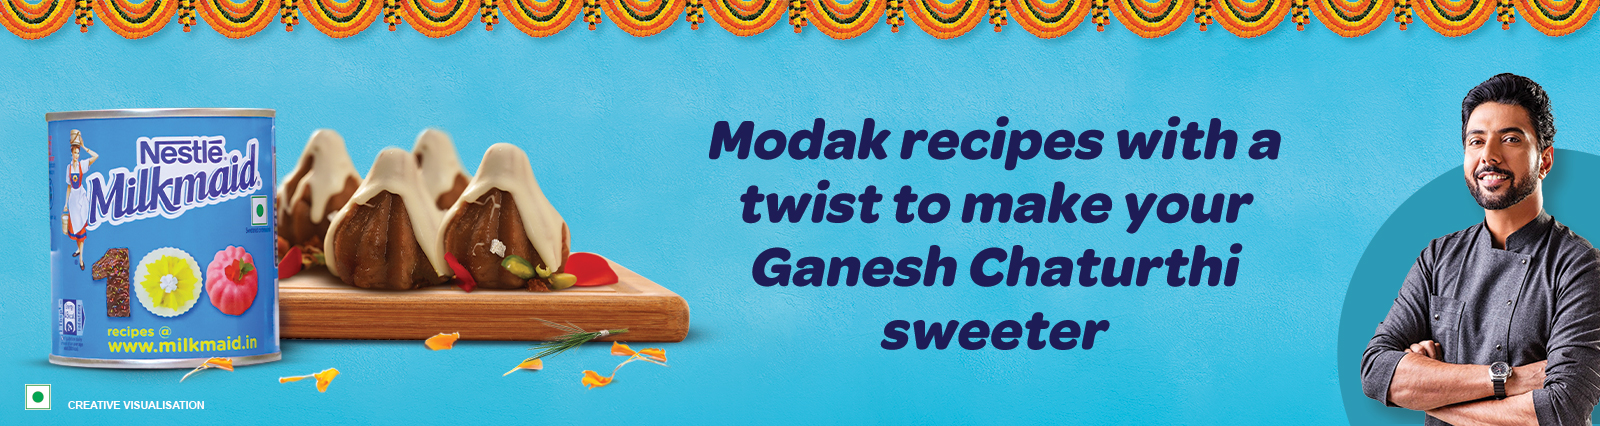 Welcome Bappa home with unique modak recipes this Ganesh Chaturthi! 